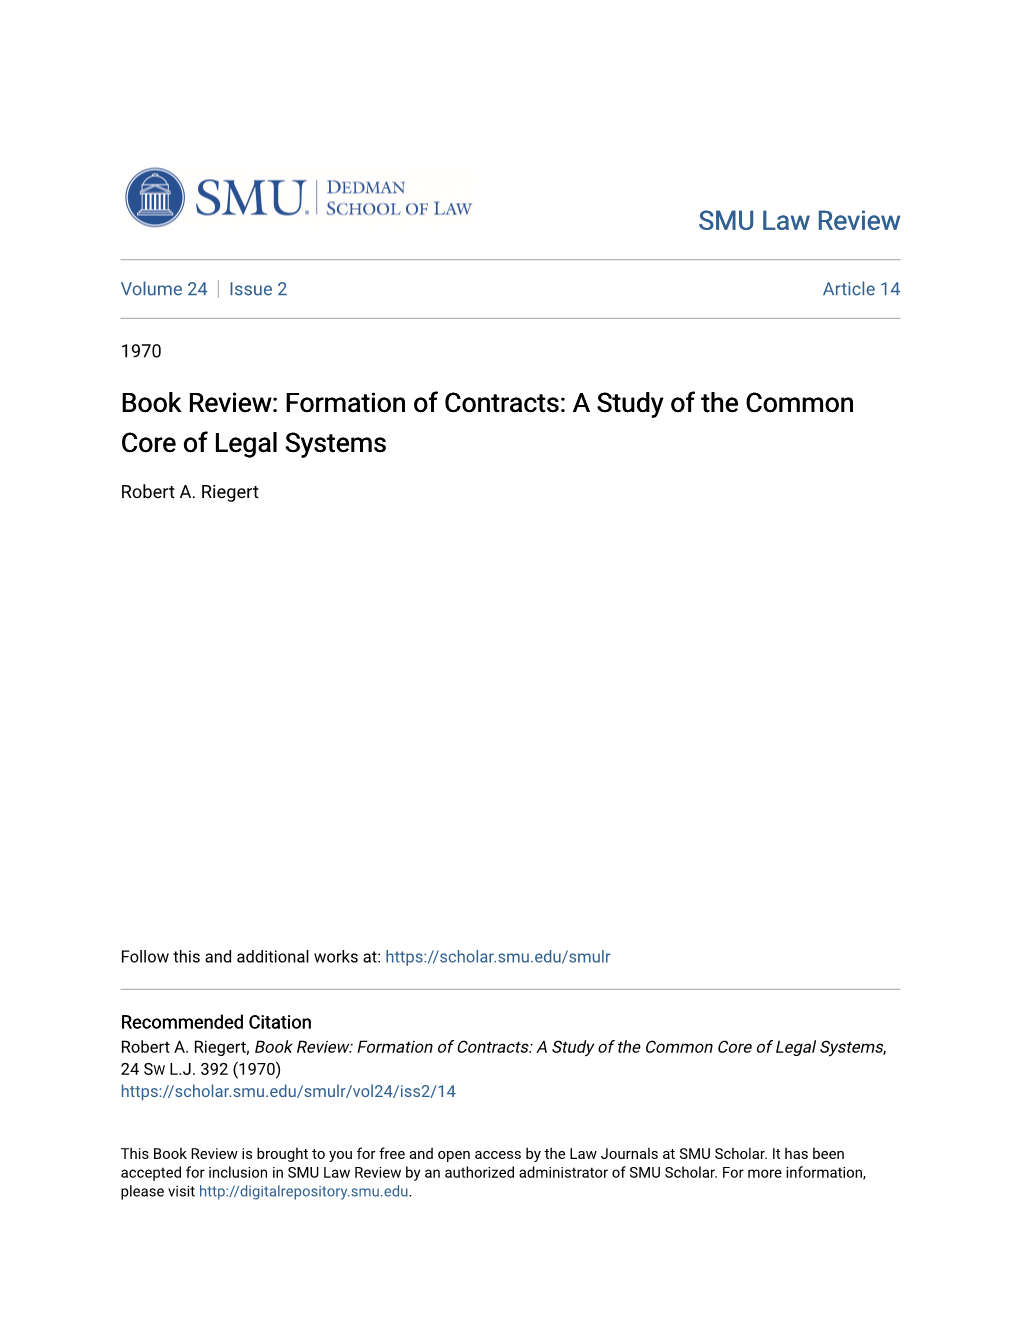 Formation of Contracts: a Study of the Common Core of Legal Systems